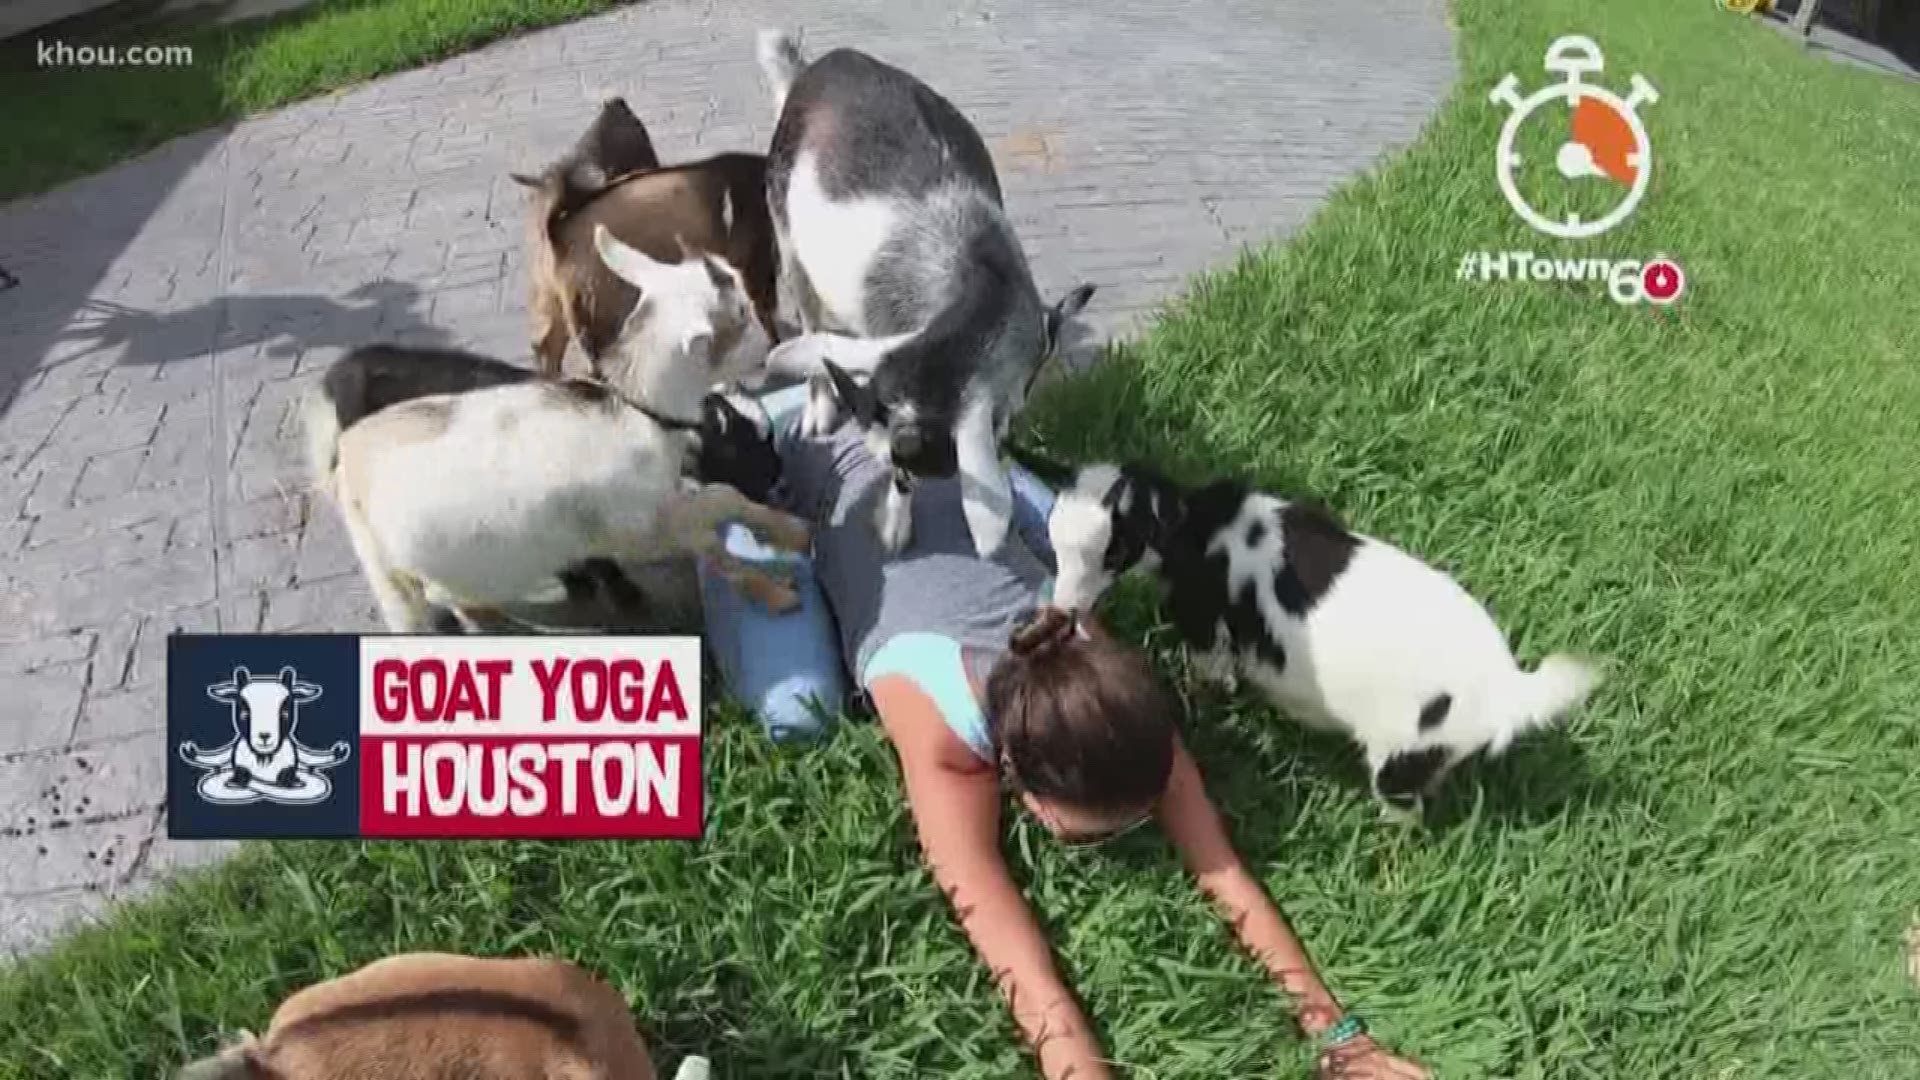 Whether it’s to find peace of mind or you want to get healthier, yoga is a great option. But if you’re looking for something extra in your practice, goat yoga might just be for you!